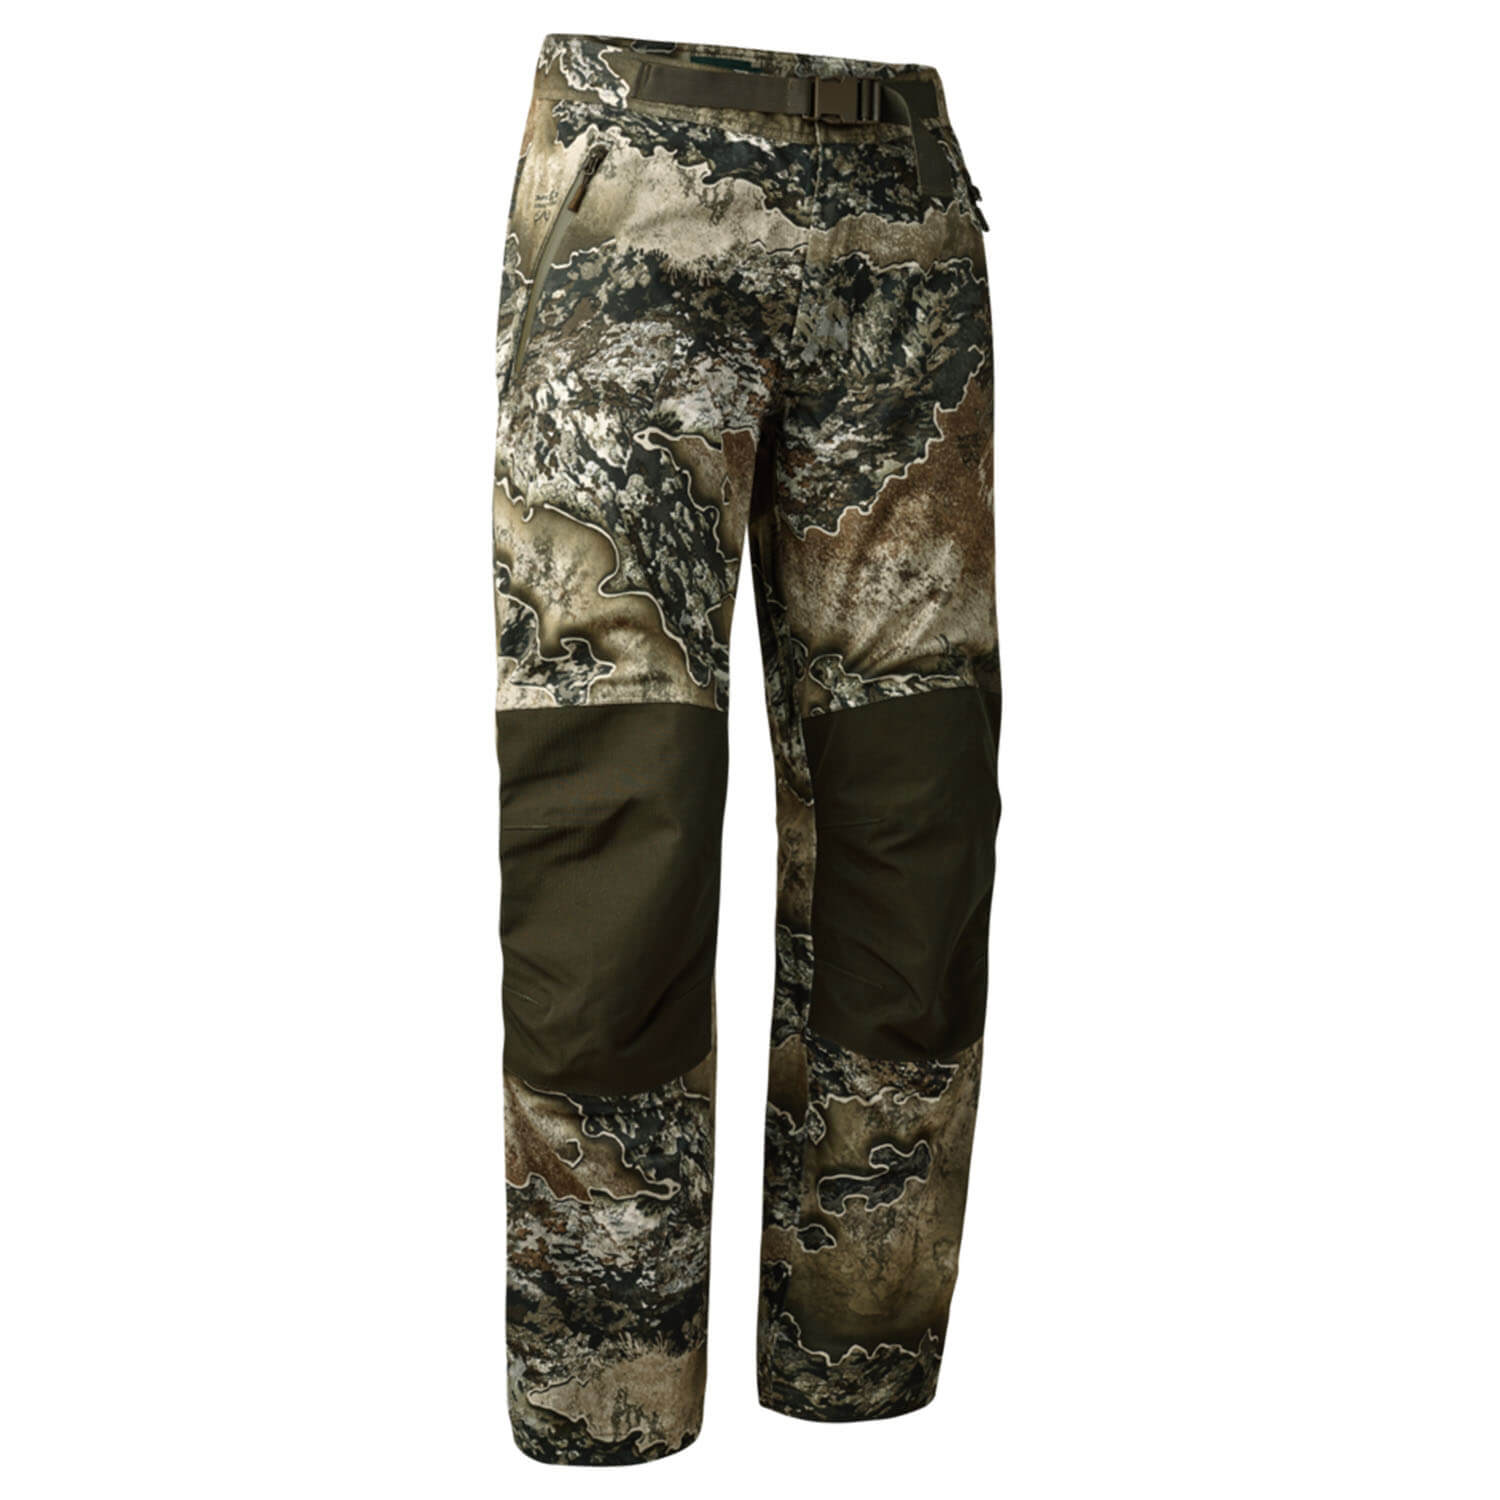 Deerhunter Rain Trousers Excape (realtree excape) - Camouflage Trousers